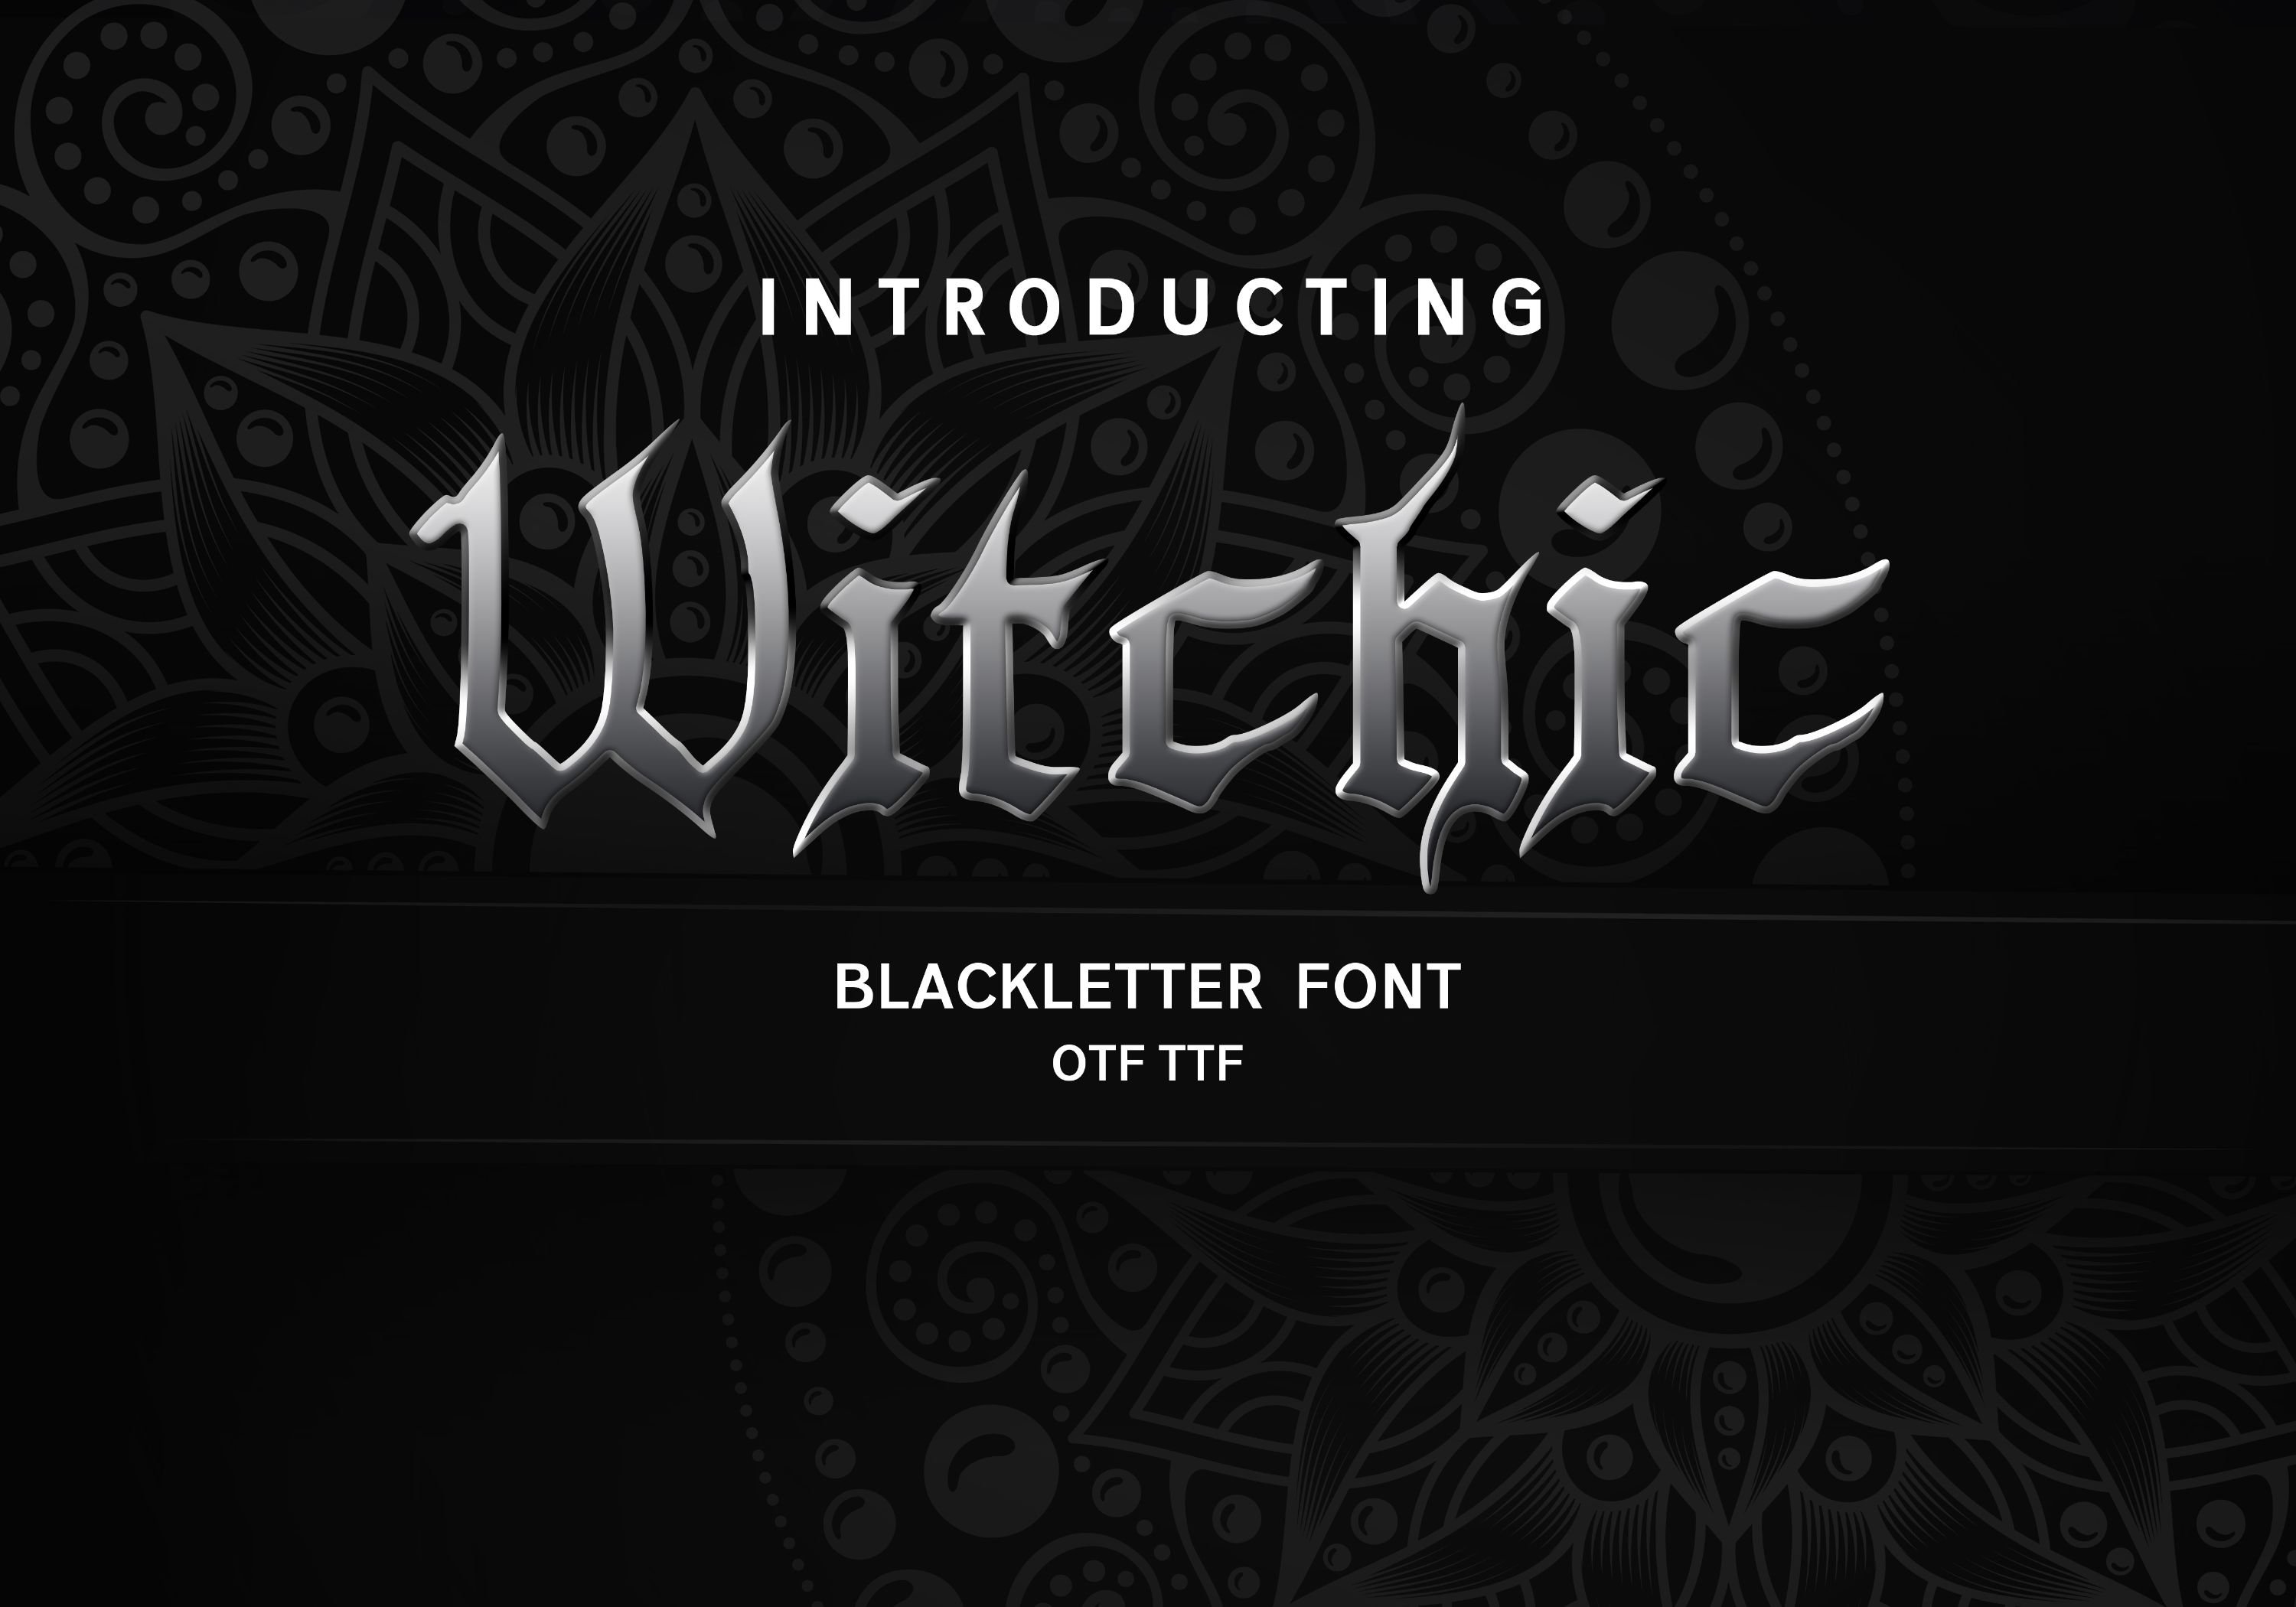 Witchic Blackletter Font cover image.